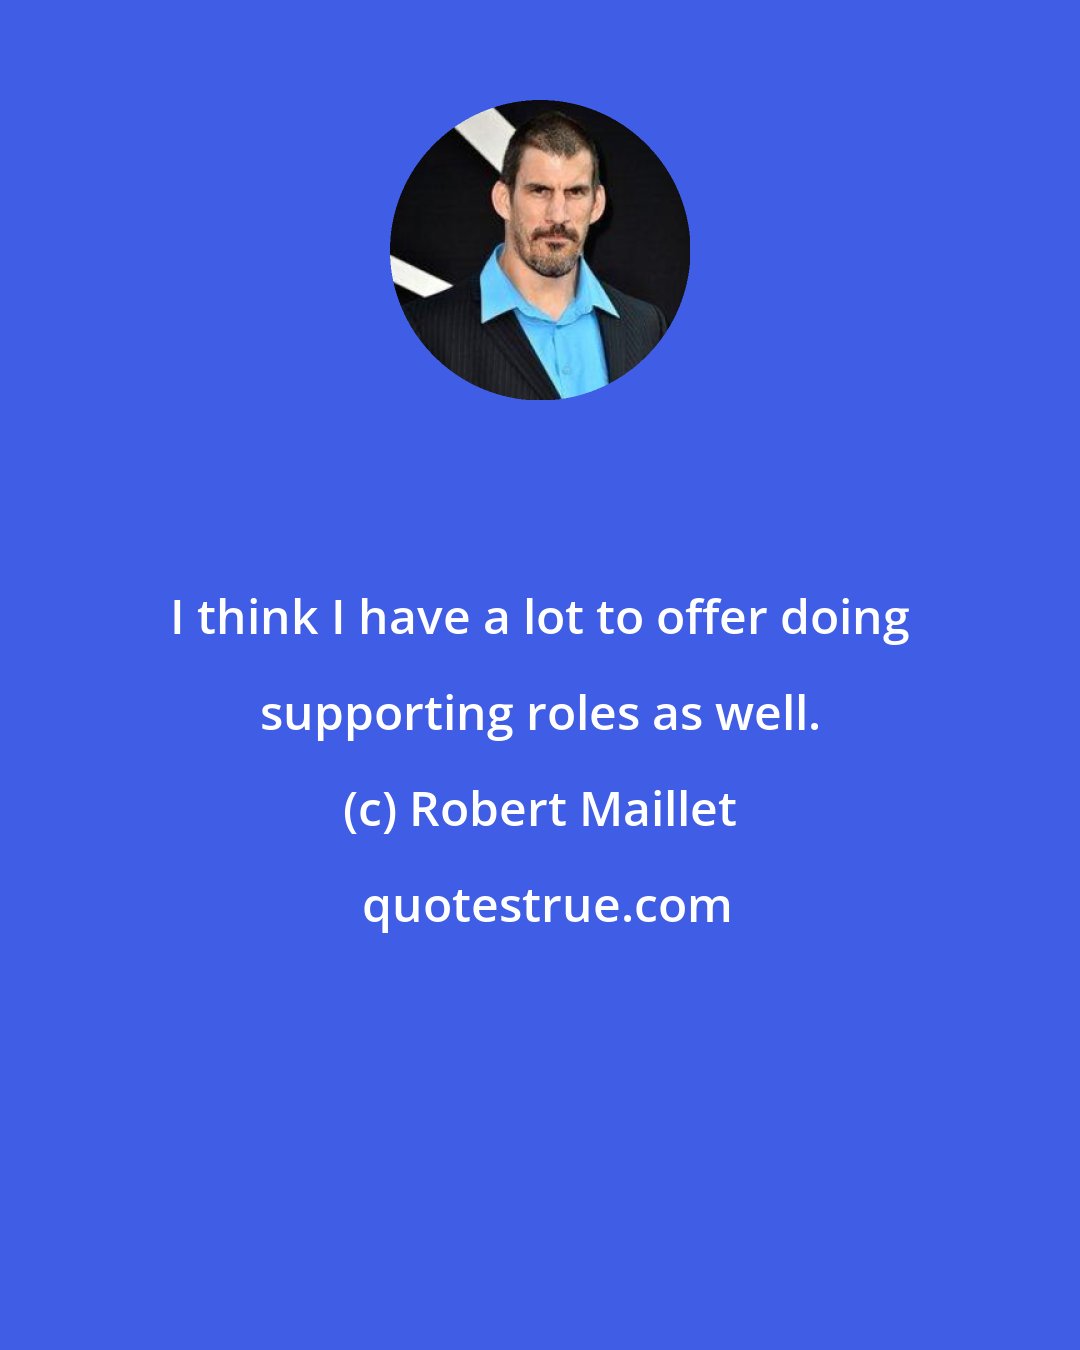 Robert Maillet: I think I have a lot to offer doing supporting roles as well.